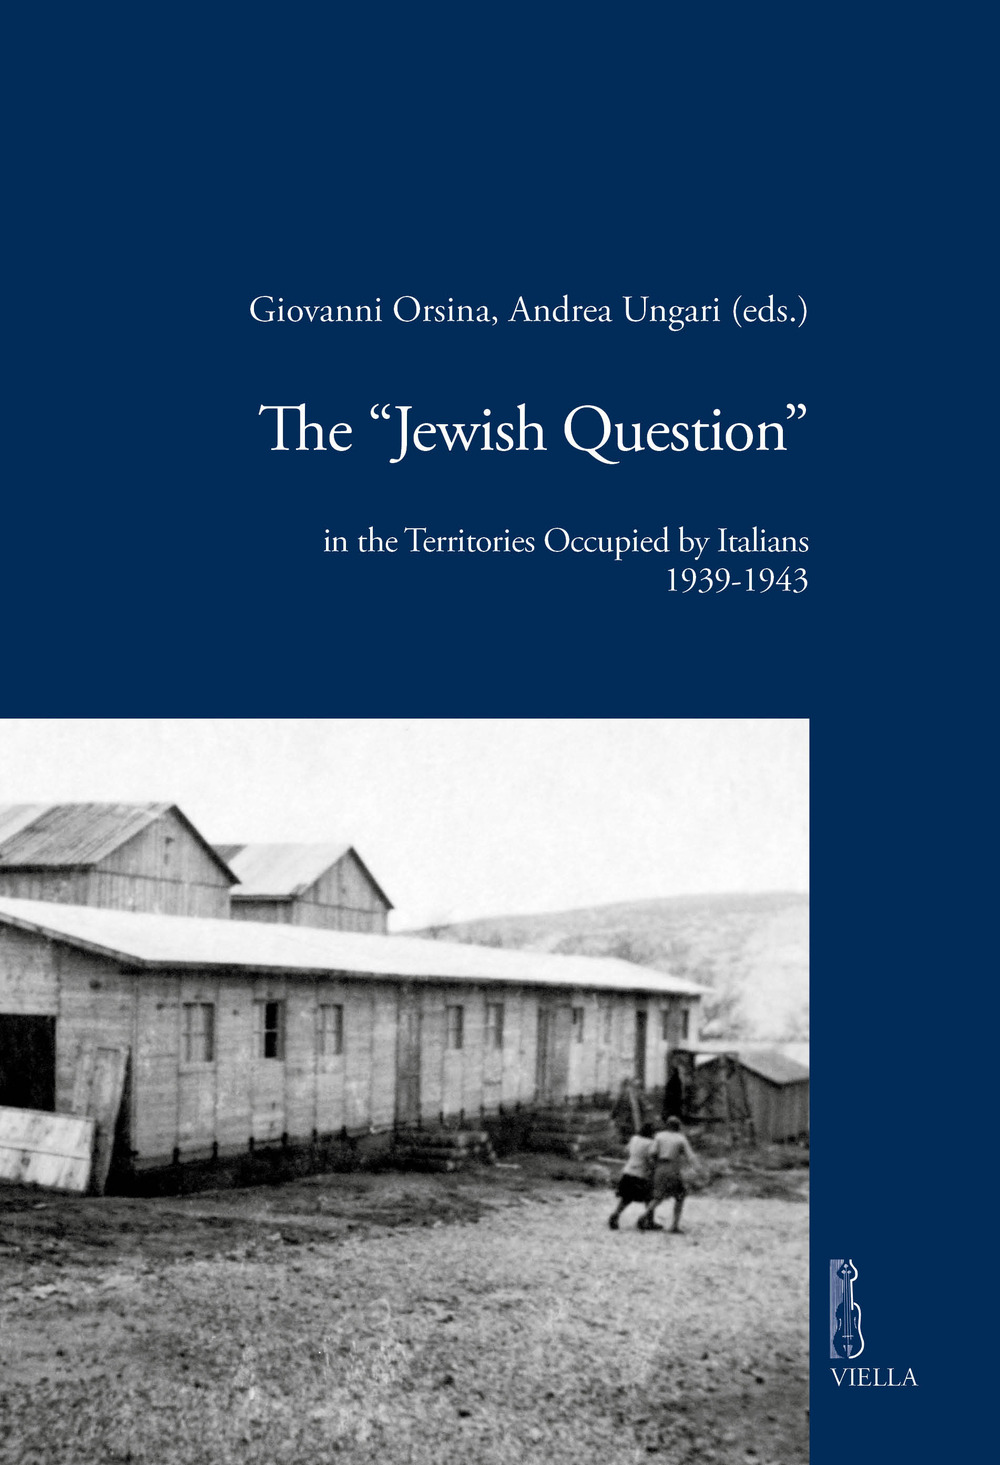 The «Jewish question» in the territories occupied by Italians (1939-1943)